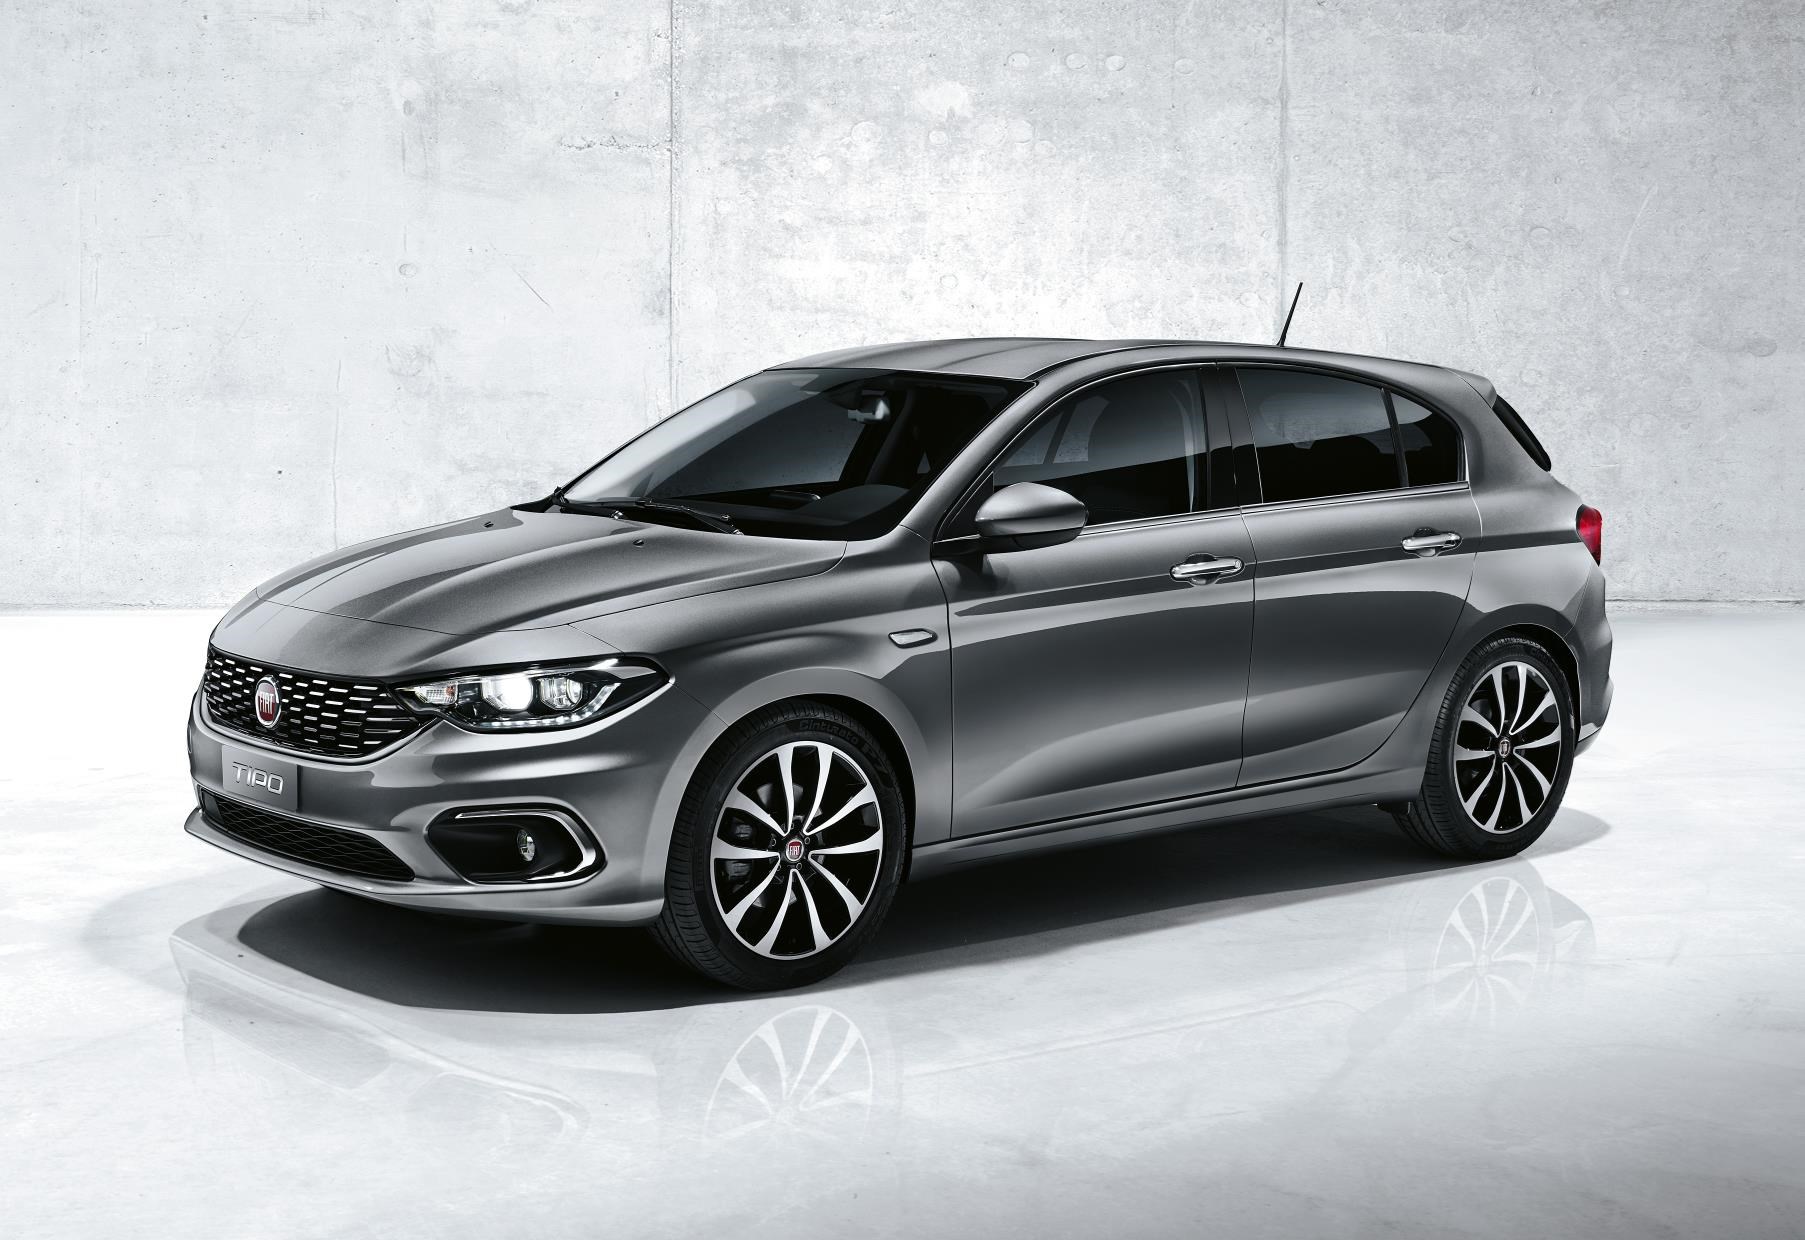 Fiat goes bold with Tipo pricing: new hatch starts from £12,995